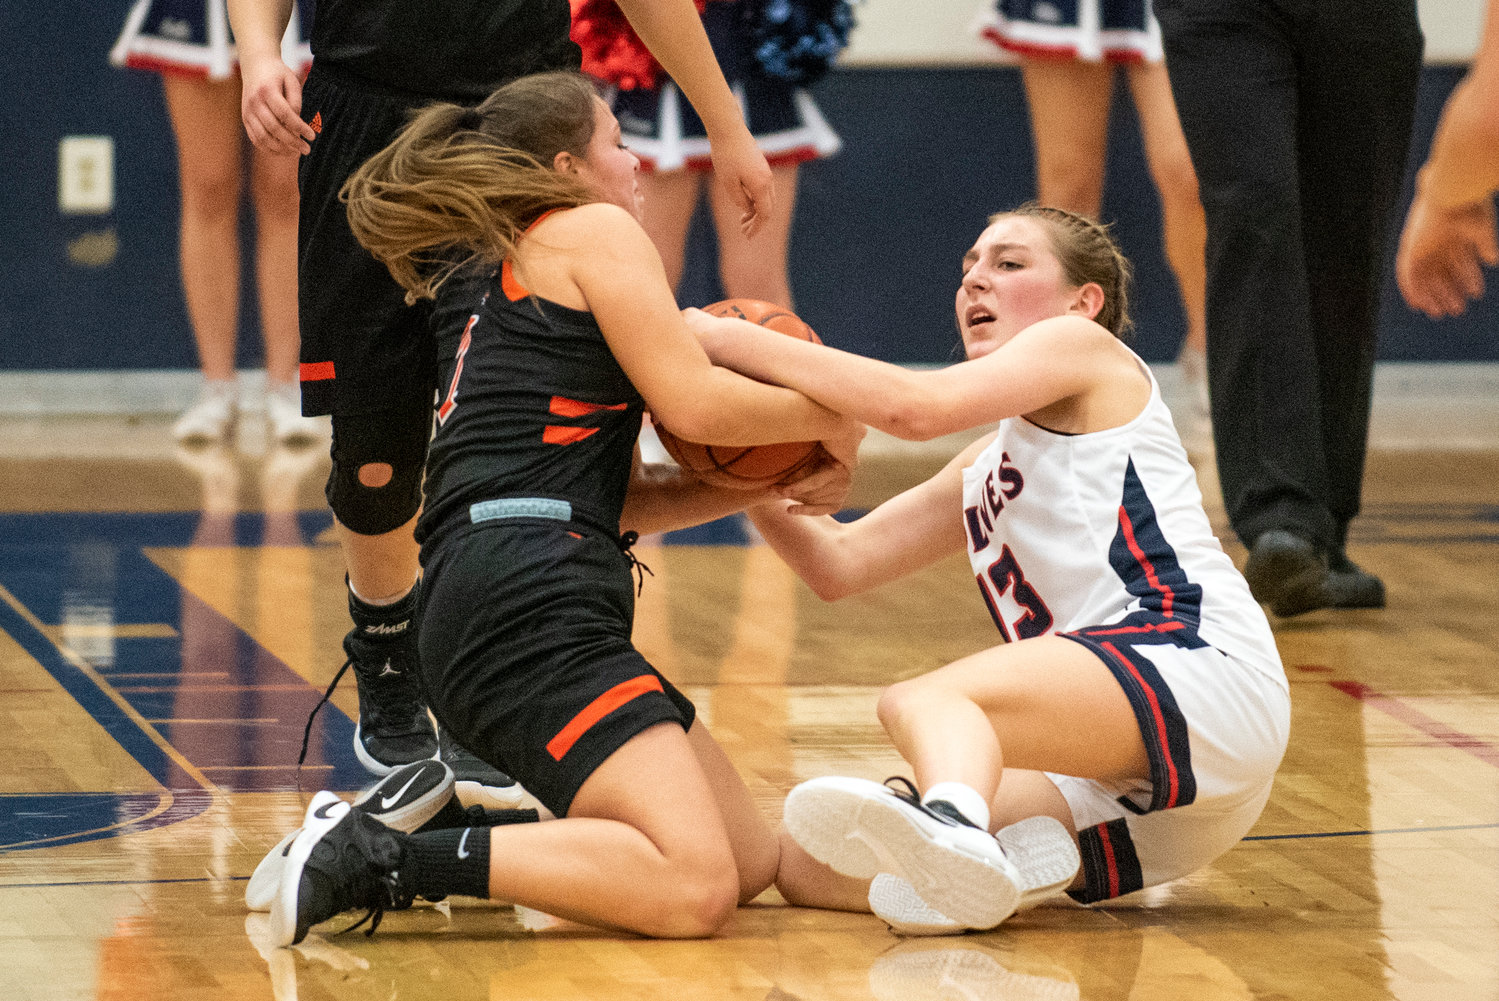 Centralia's Jadyn Hawley, left, and Black Hills' Claire Johnson battle for a loose ball on Dec. 17.